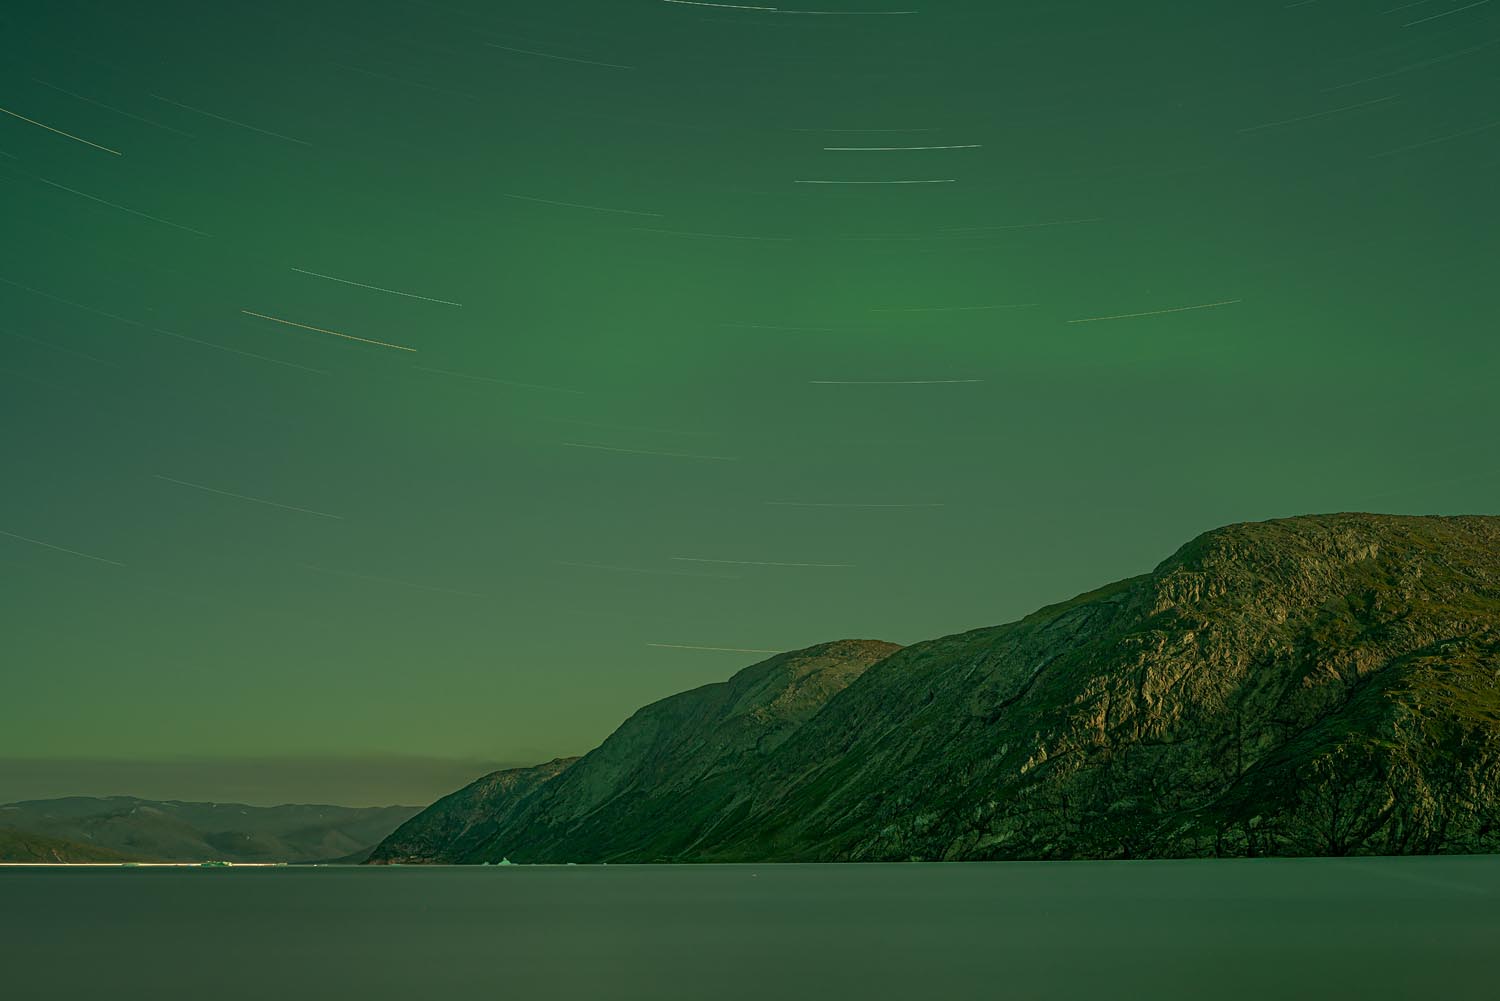 Shadow and Light: New Night Landscape Photographs of Greenland By Steve Giovinco. Green Lights Over Fjord at Night